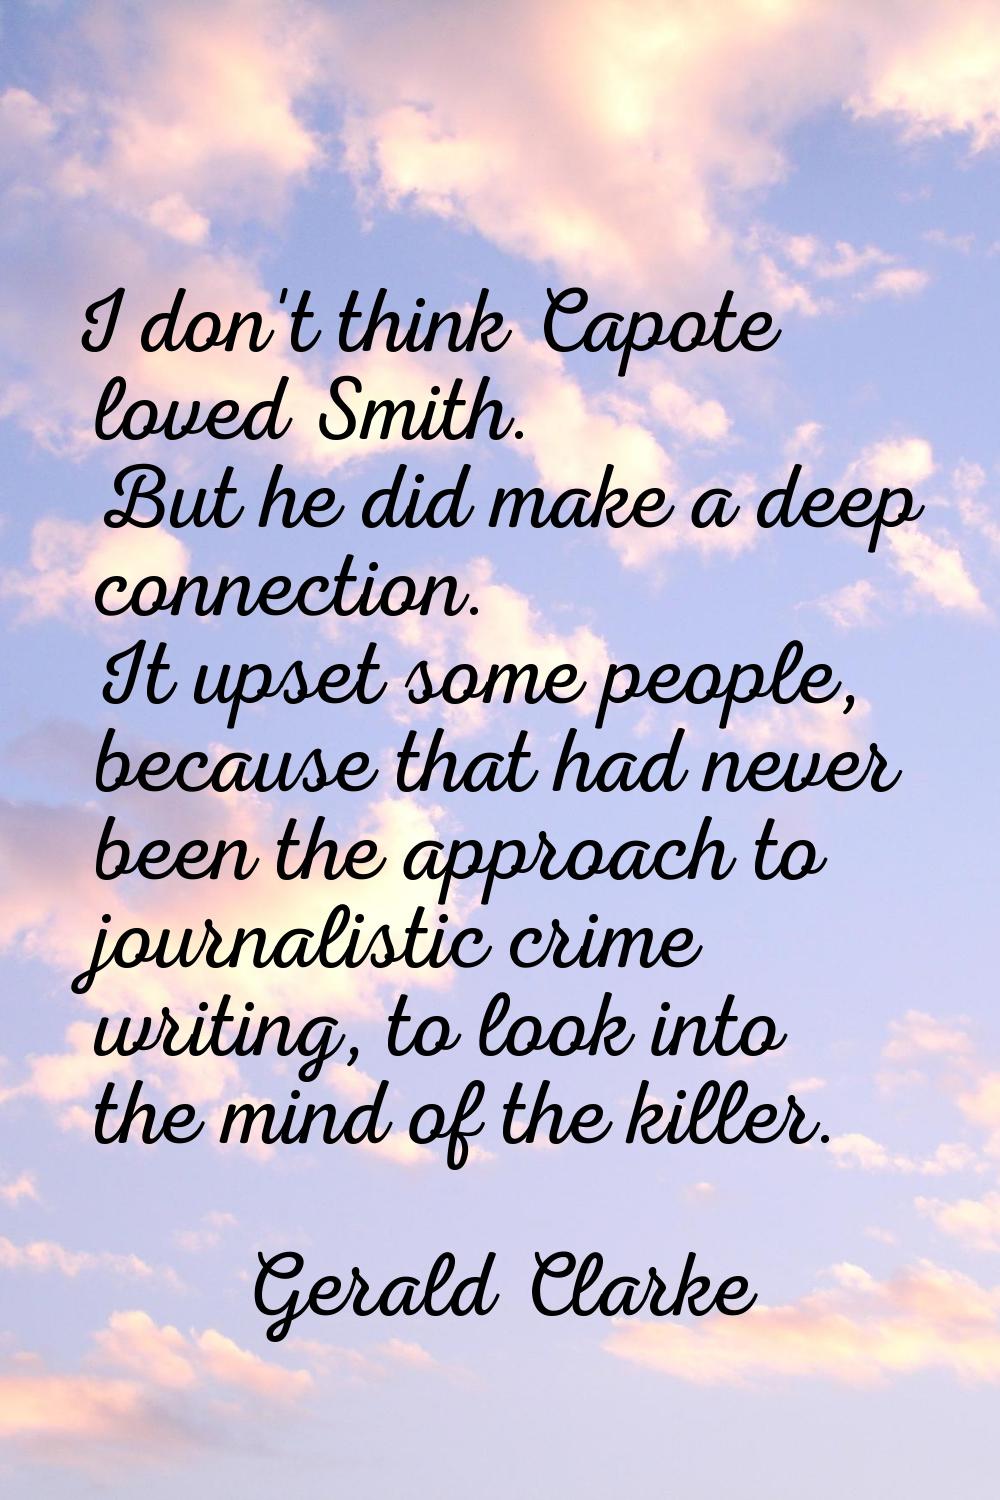 I don't think Capote loved Smith. But he did make a deep connection. It upset some people, because 